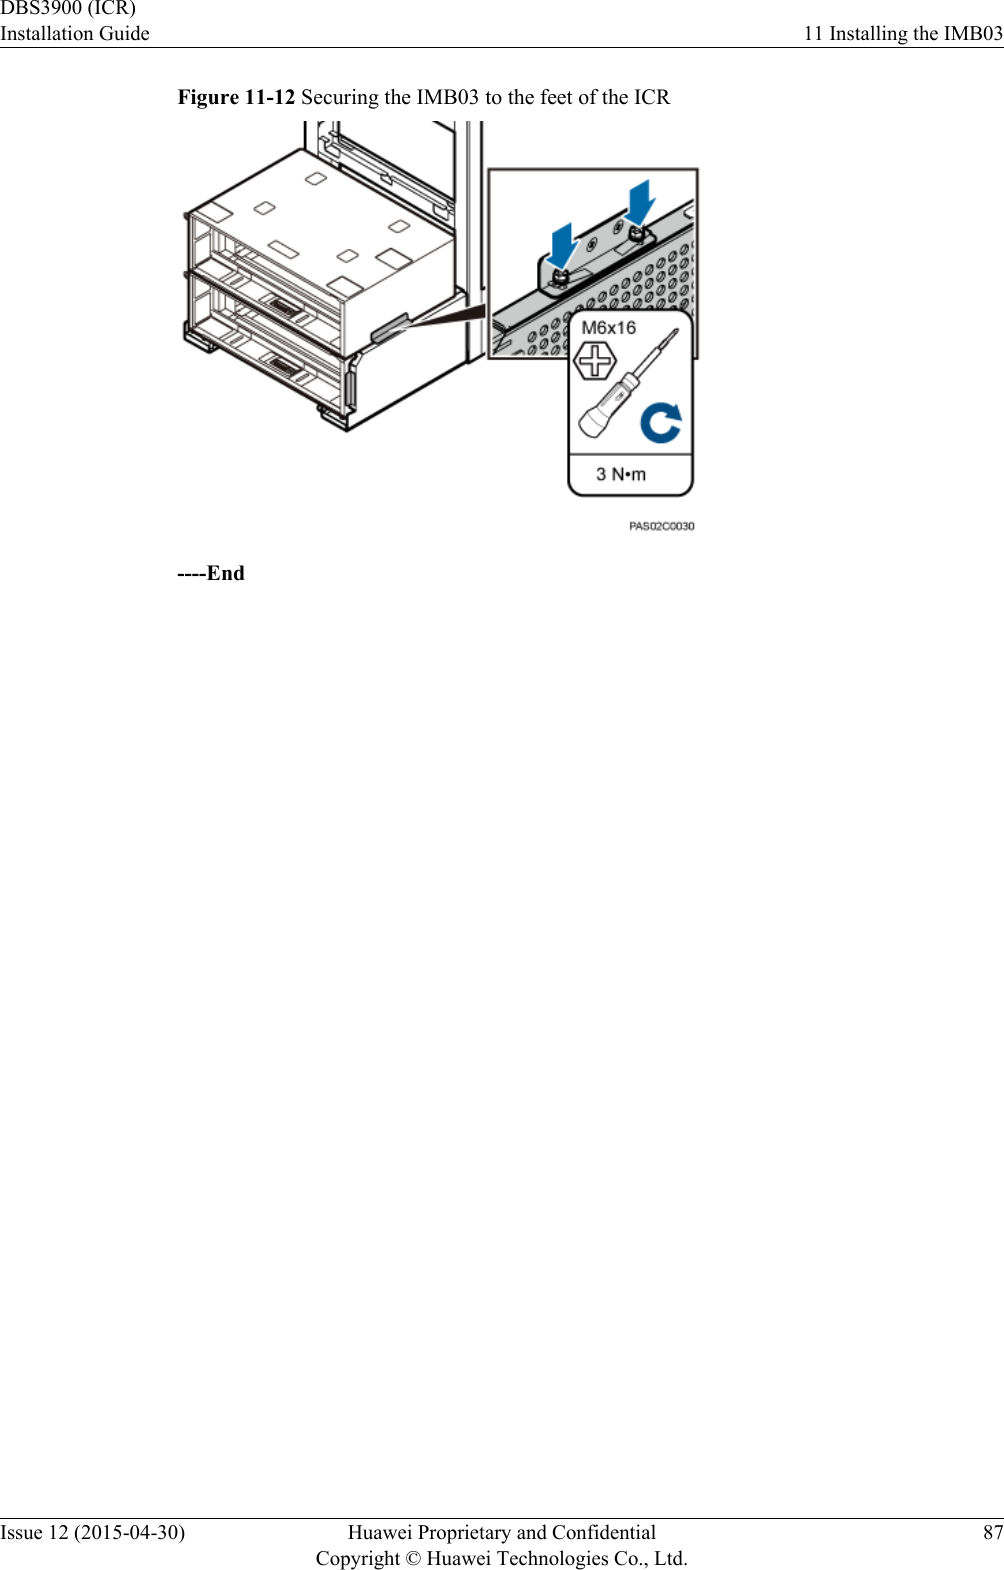 Figure 11-12 Securing the IMB03 to the feet of the ICR----EndDBS3900 (ICR)Installation Guide 11 Installing the IMB03Issue 12 (2015-04-30) Huawei Proprietary and ConfidentialCopyright © Huawei Technologies Co., Ltd.87